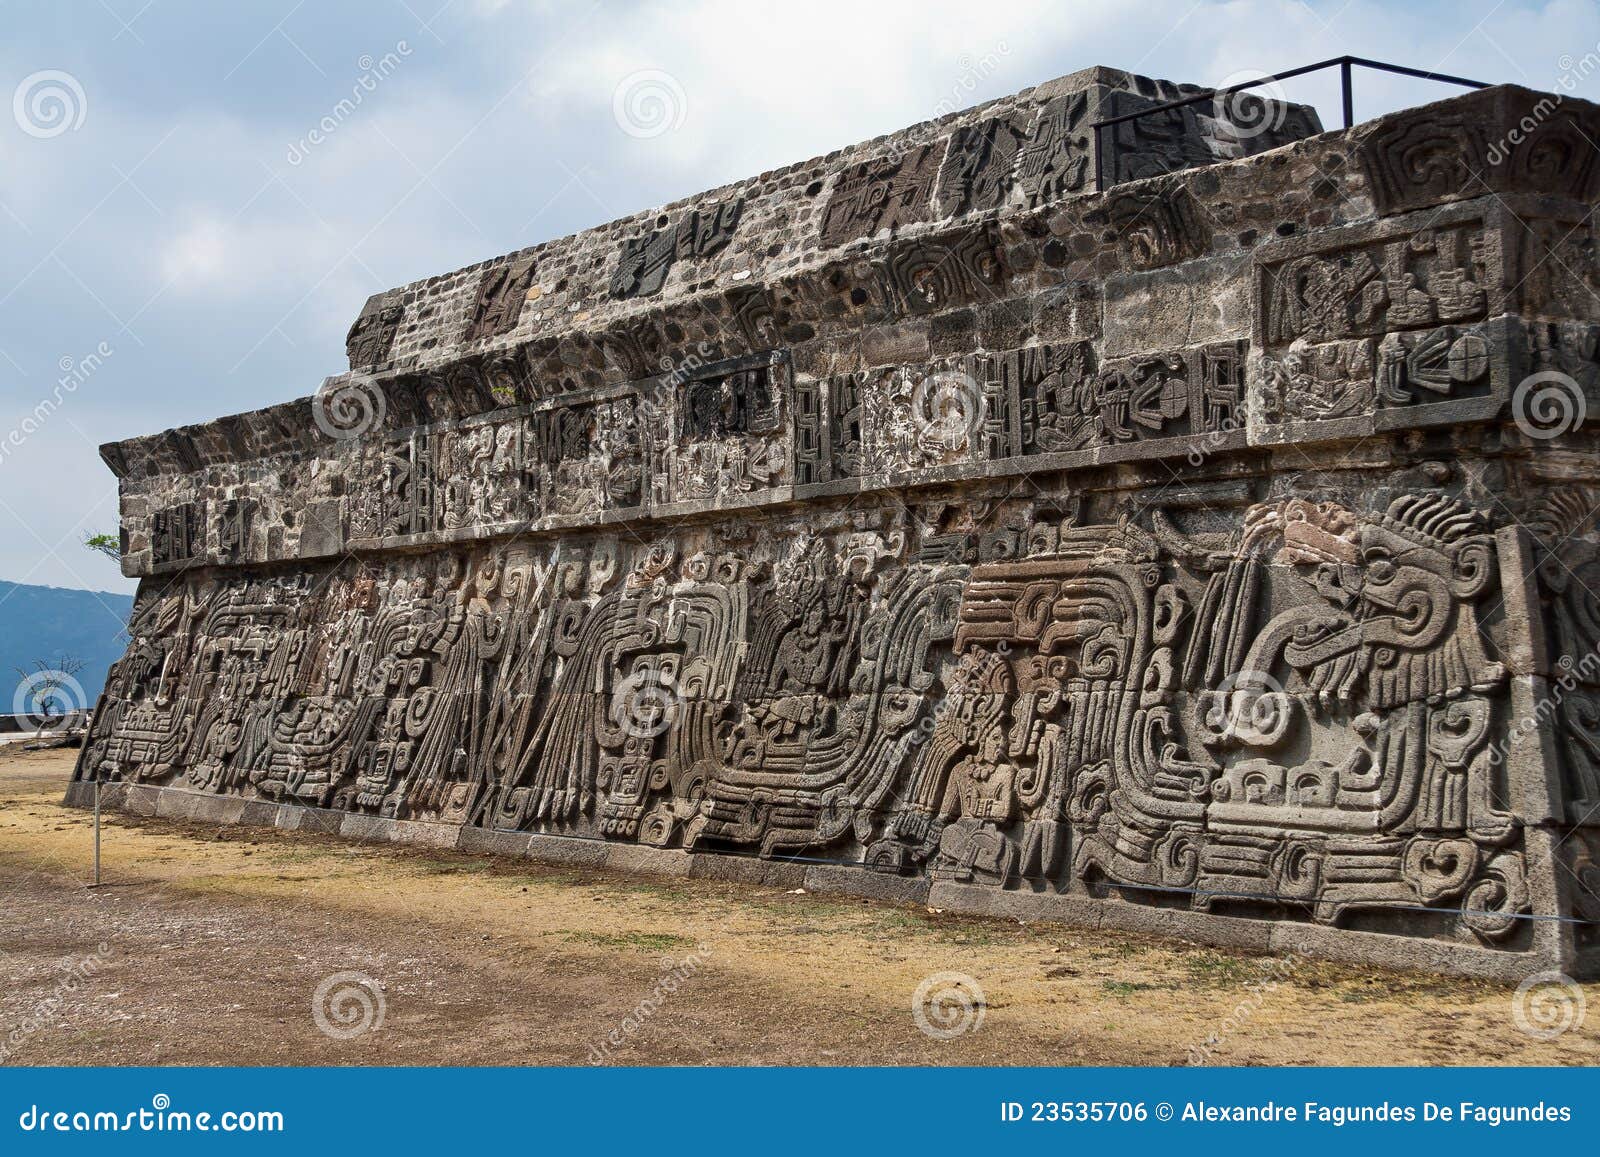 the temple of the feathered serpent xochicalco